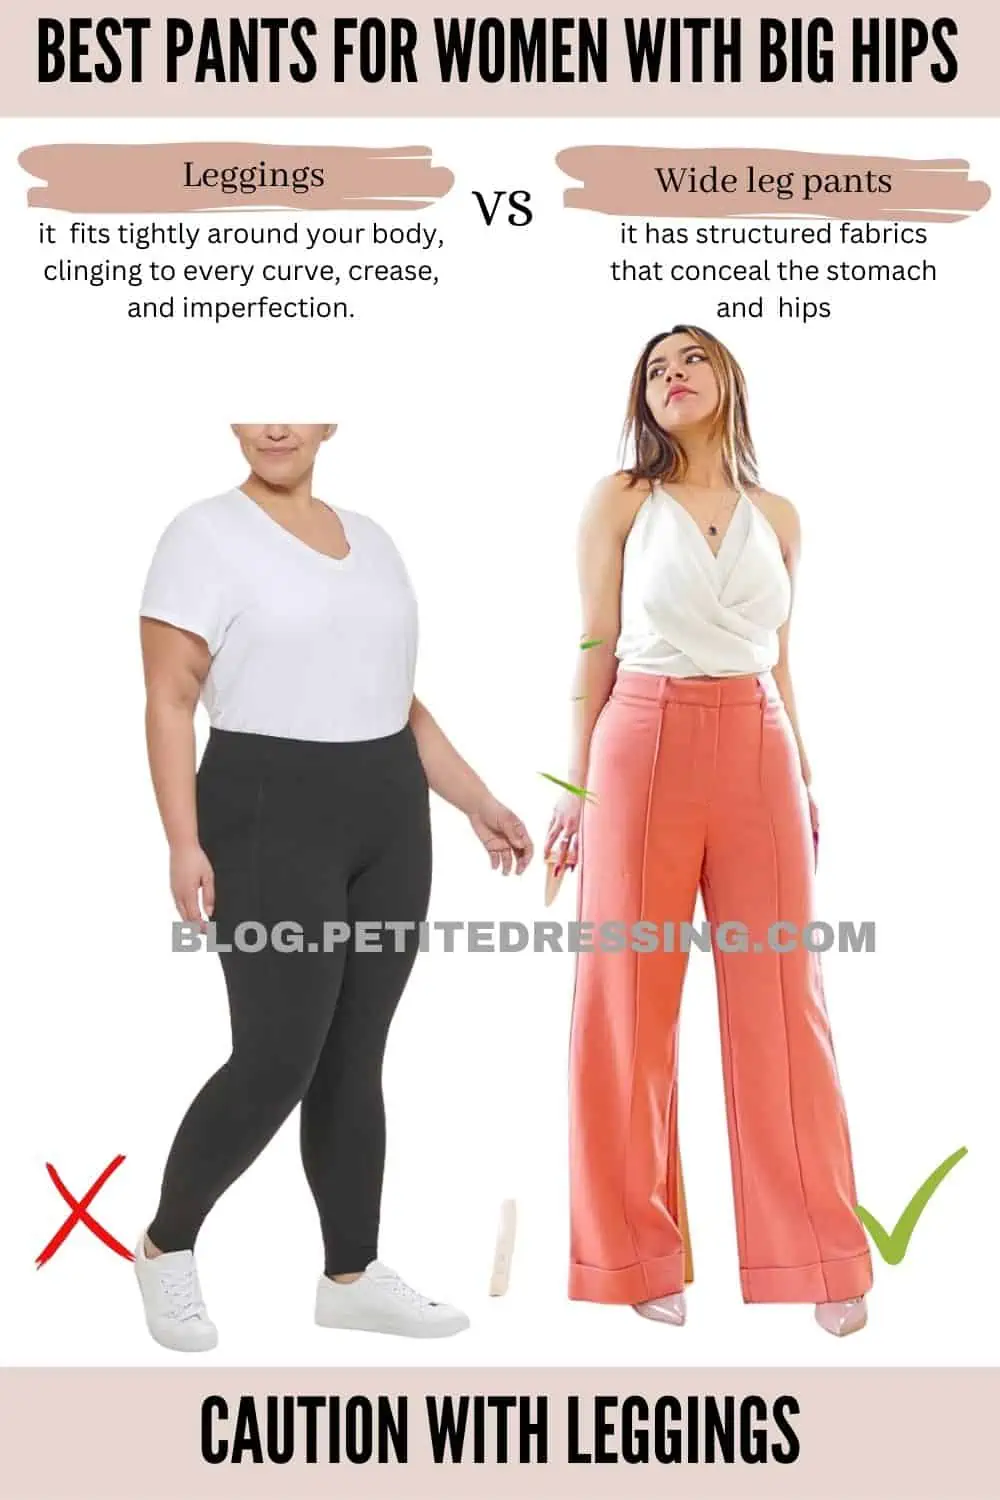 How To Know Which Trousers Flatter Your Figure